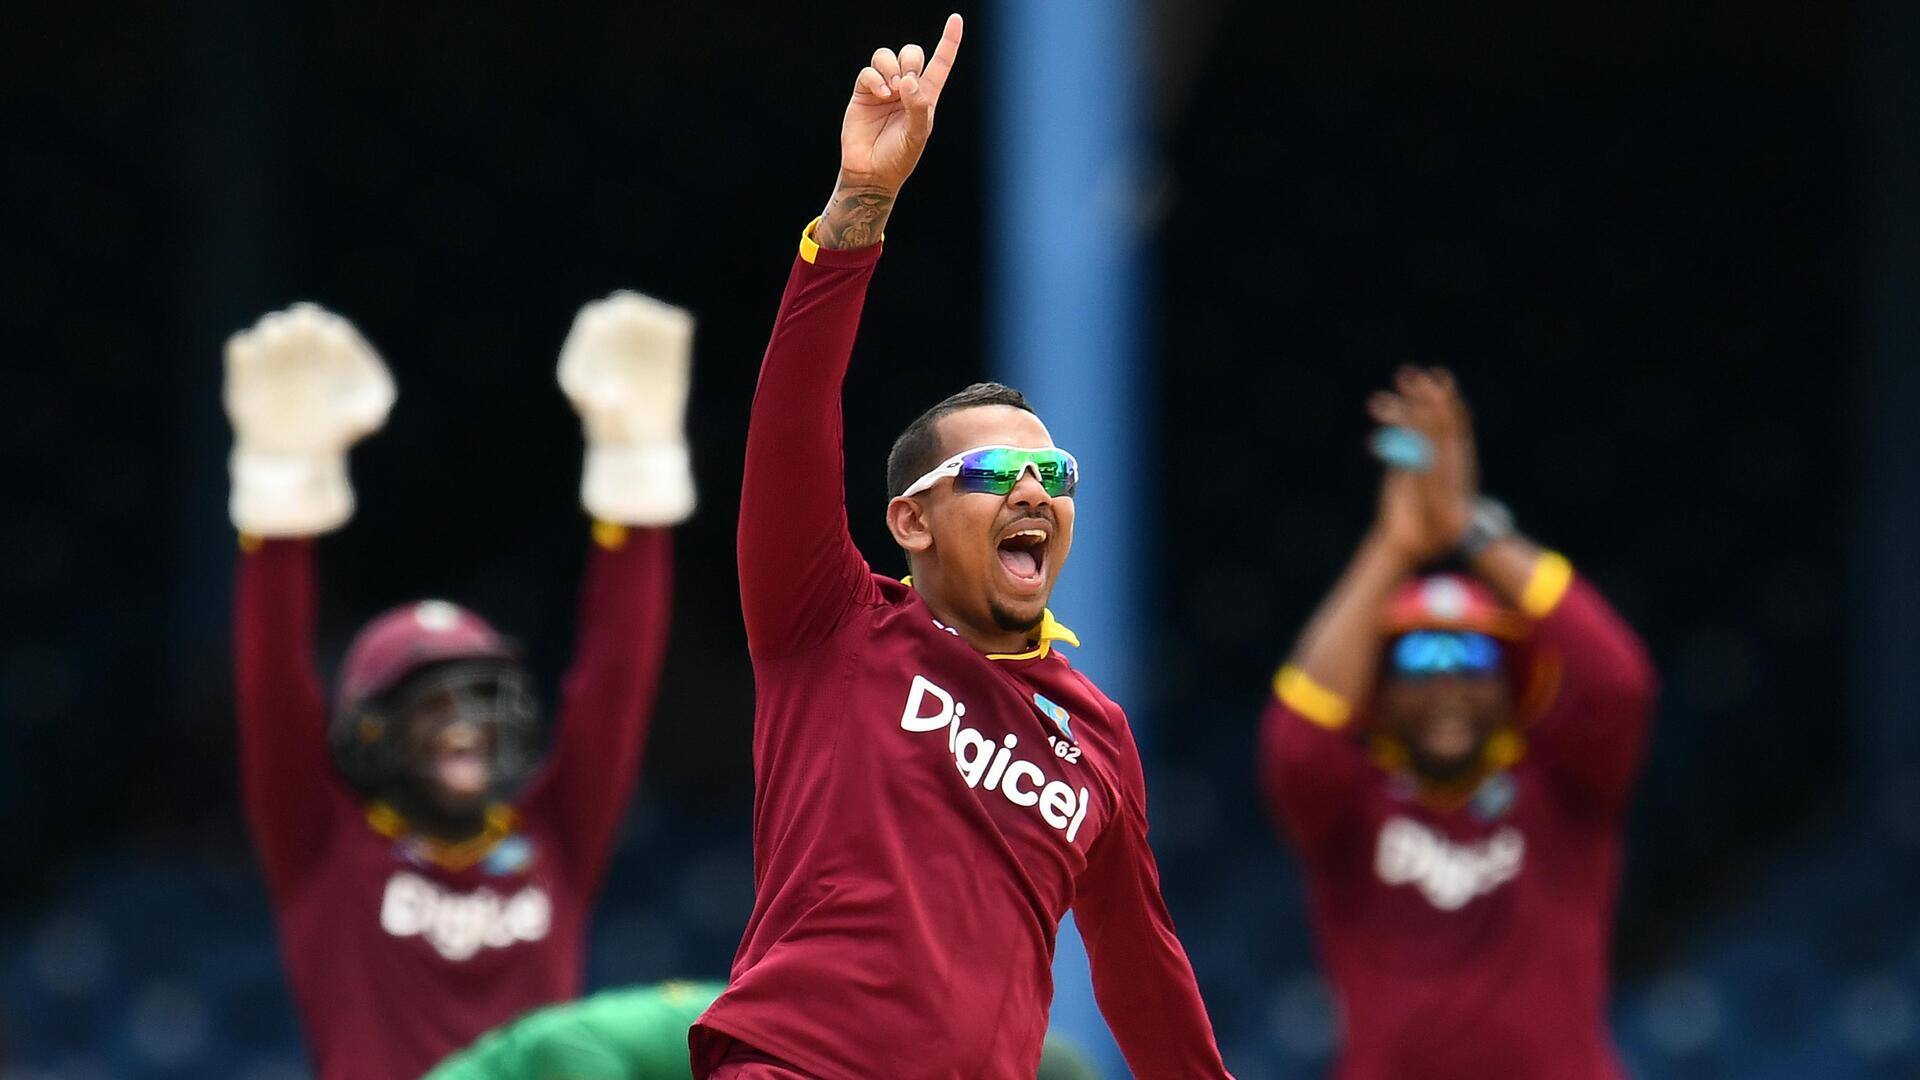 Sunil Narine announces retirement from international cricket: Decoding his stats